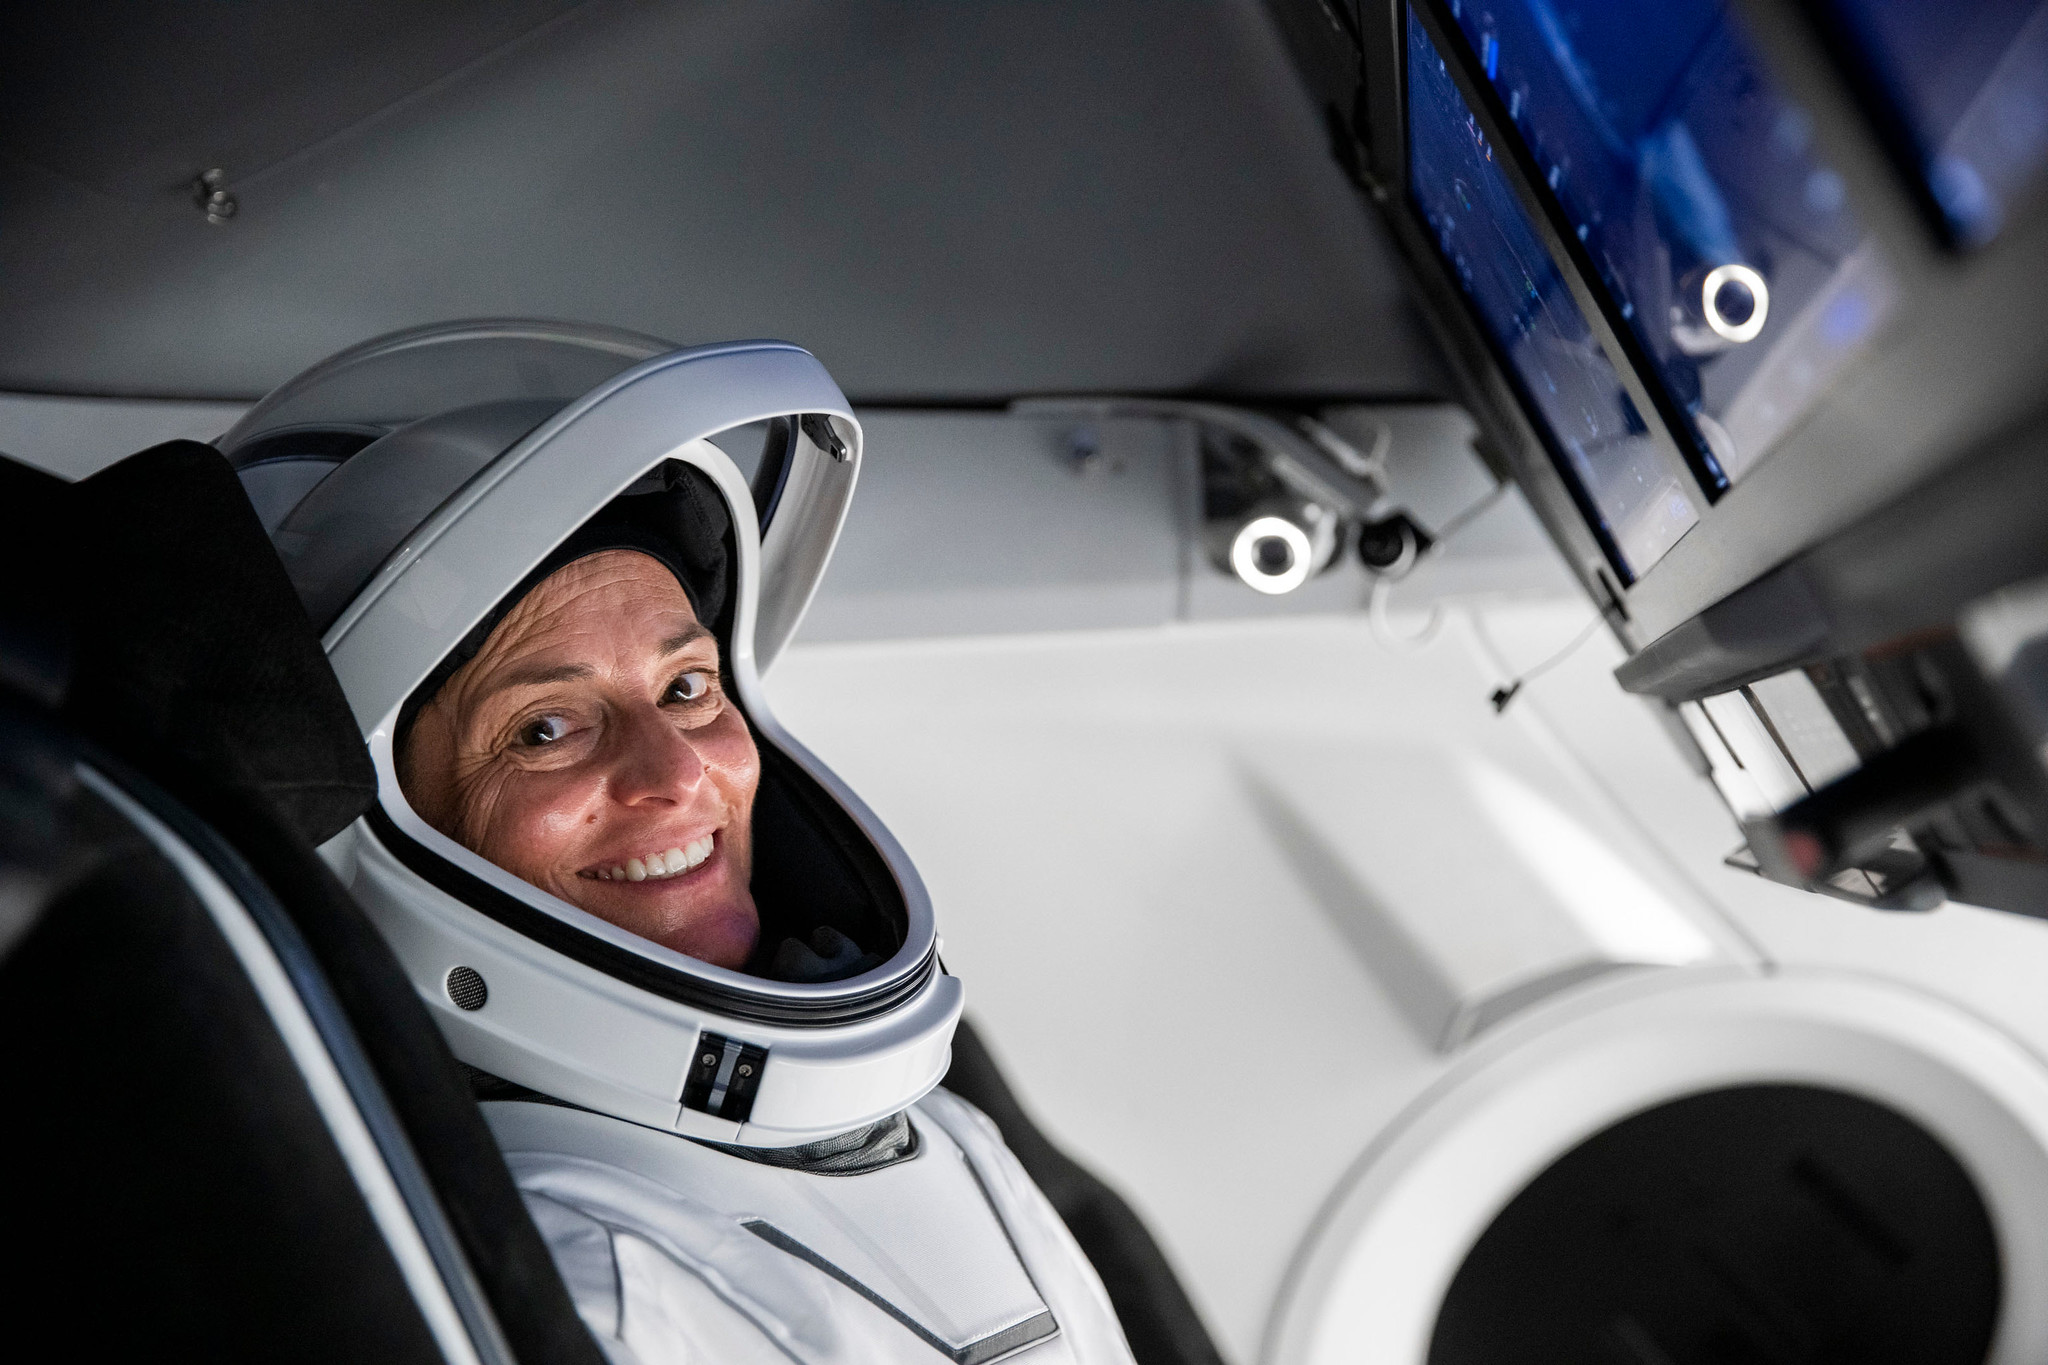  SpaceX Crew-5 Commander Nicole Aunapu Mann from NASA is pictured during a Crew Dragon cockpit training session at SpaceX headquarters in Hawthorne, California